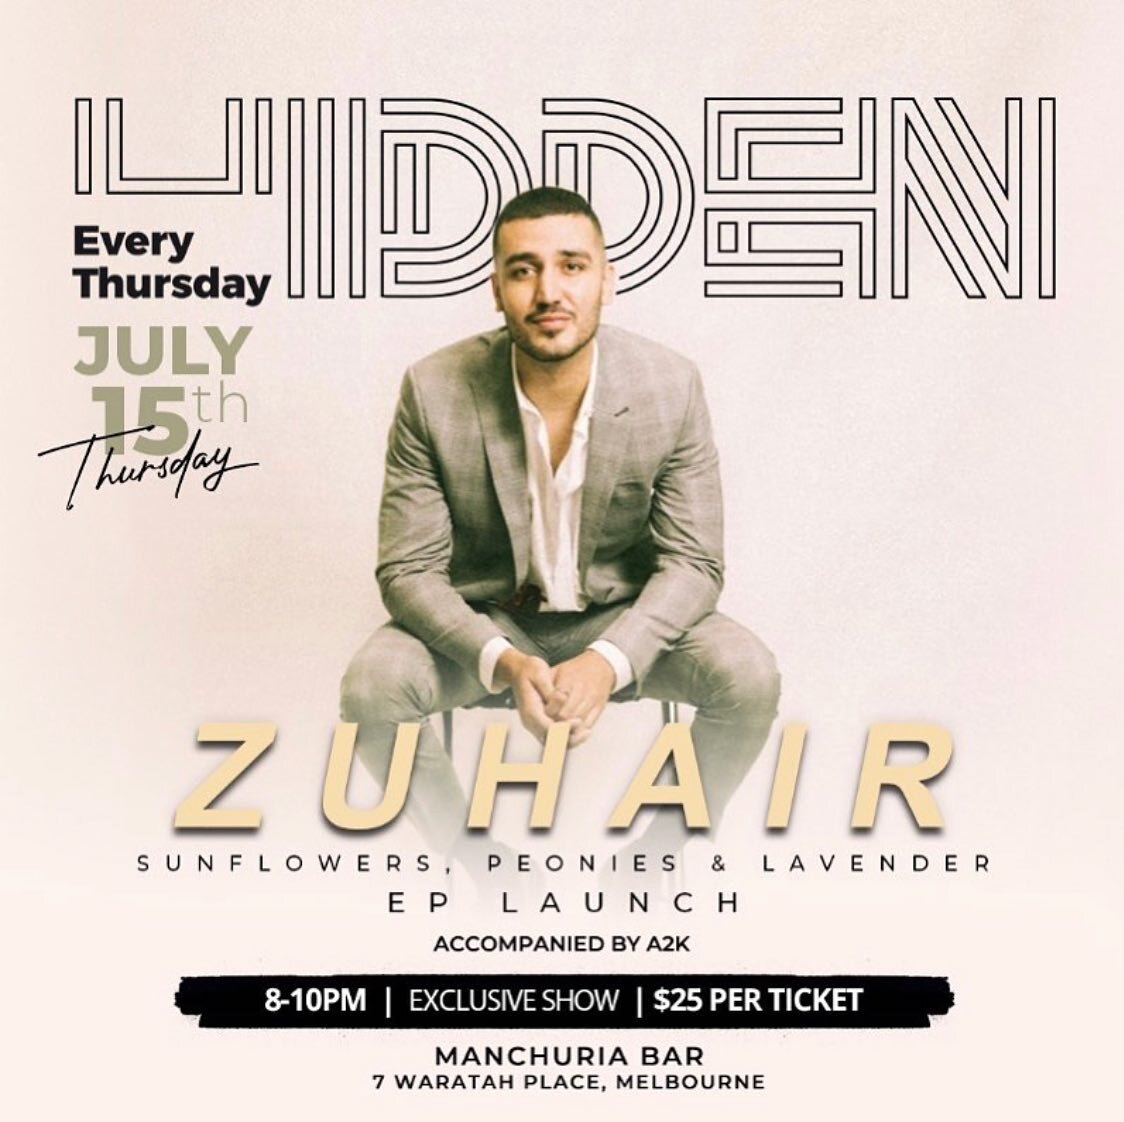 Hidden Thursdays presents @zuhairrehan 
Sunflowers, Peonies &amp; Lavender EP launch! 

Zuhair is Independent R&amp;B singer/songwriter from Melbourne's West with over 25 million streams and counting. Come join us in celebrating the EP launch with Zu